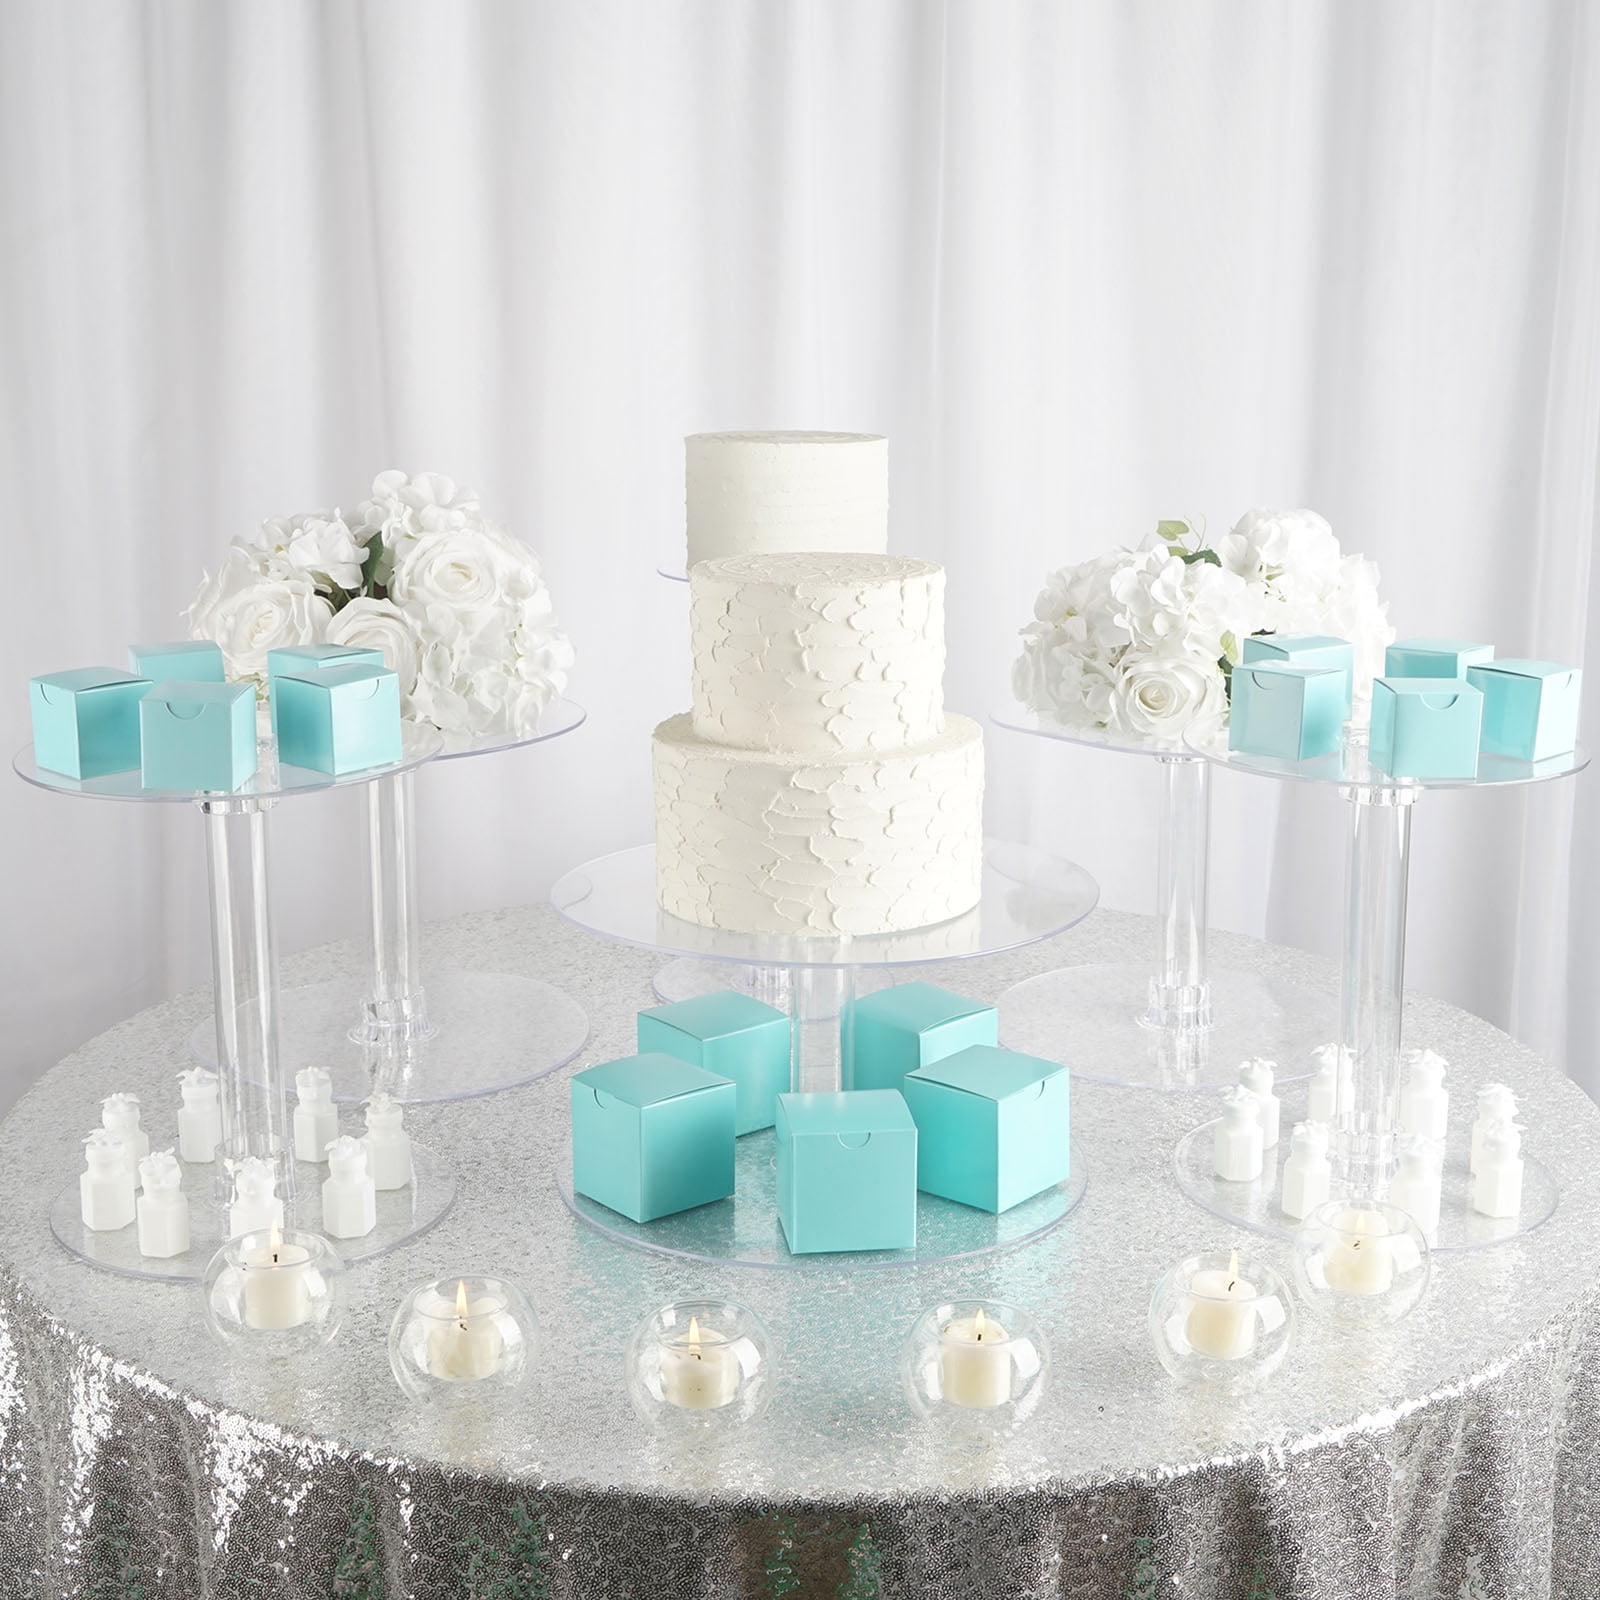 7 Tier White Round Wedding Acrylic Cupcake Stand Tree Tower Cup Cake Display Des for sale online 